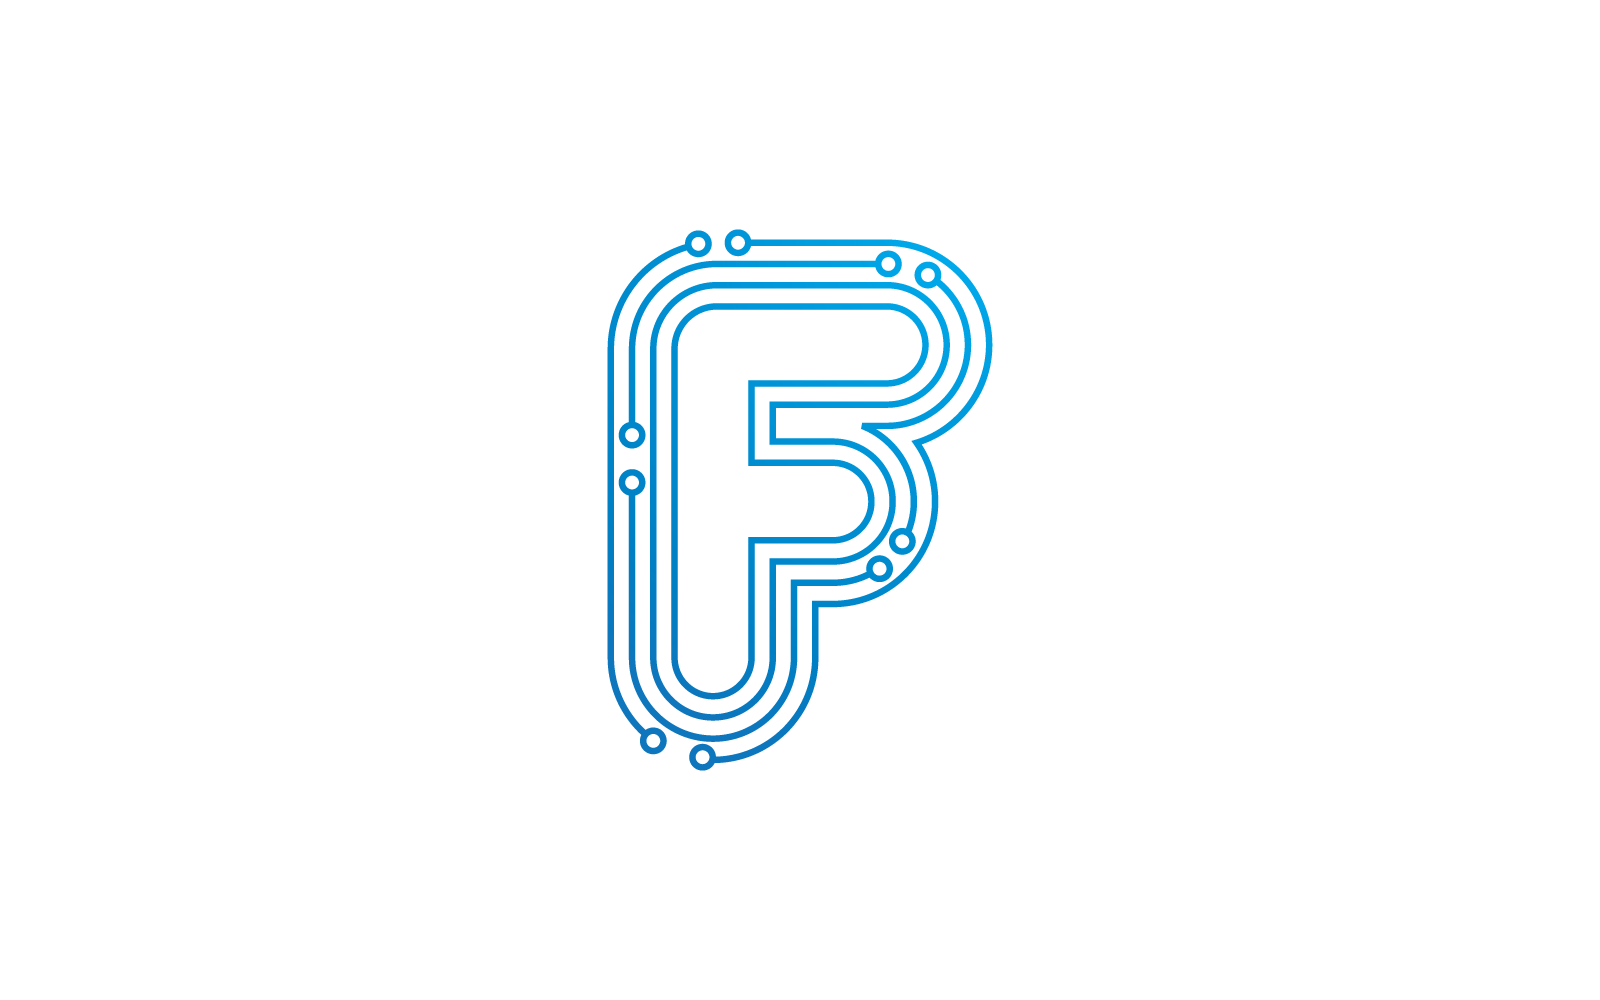 F initial letter Circuit technology illustration logo vector